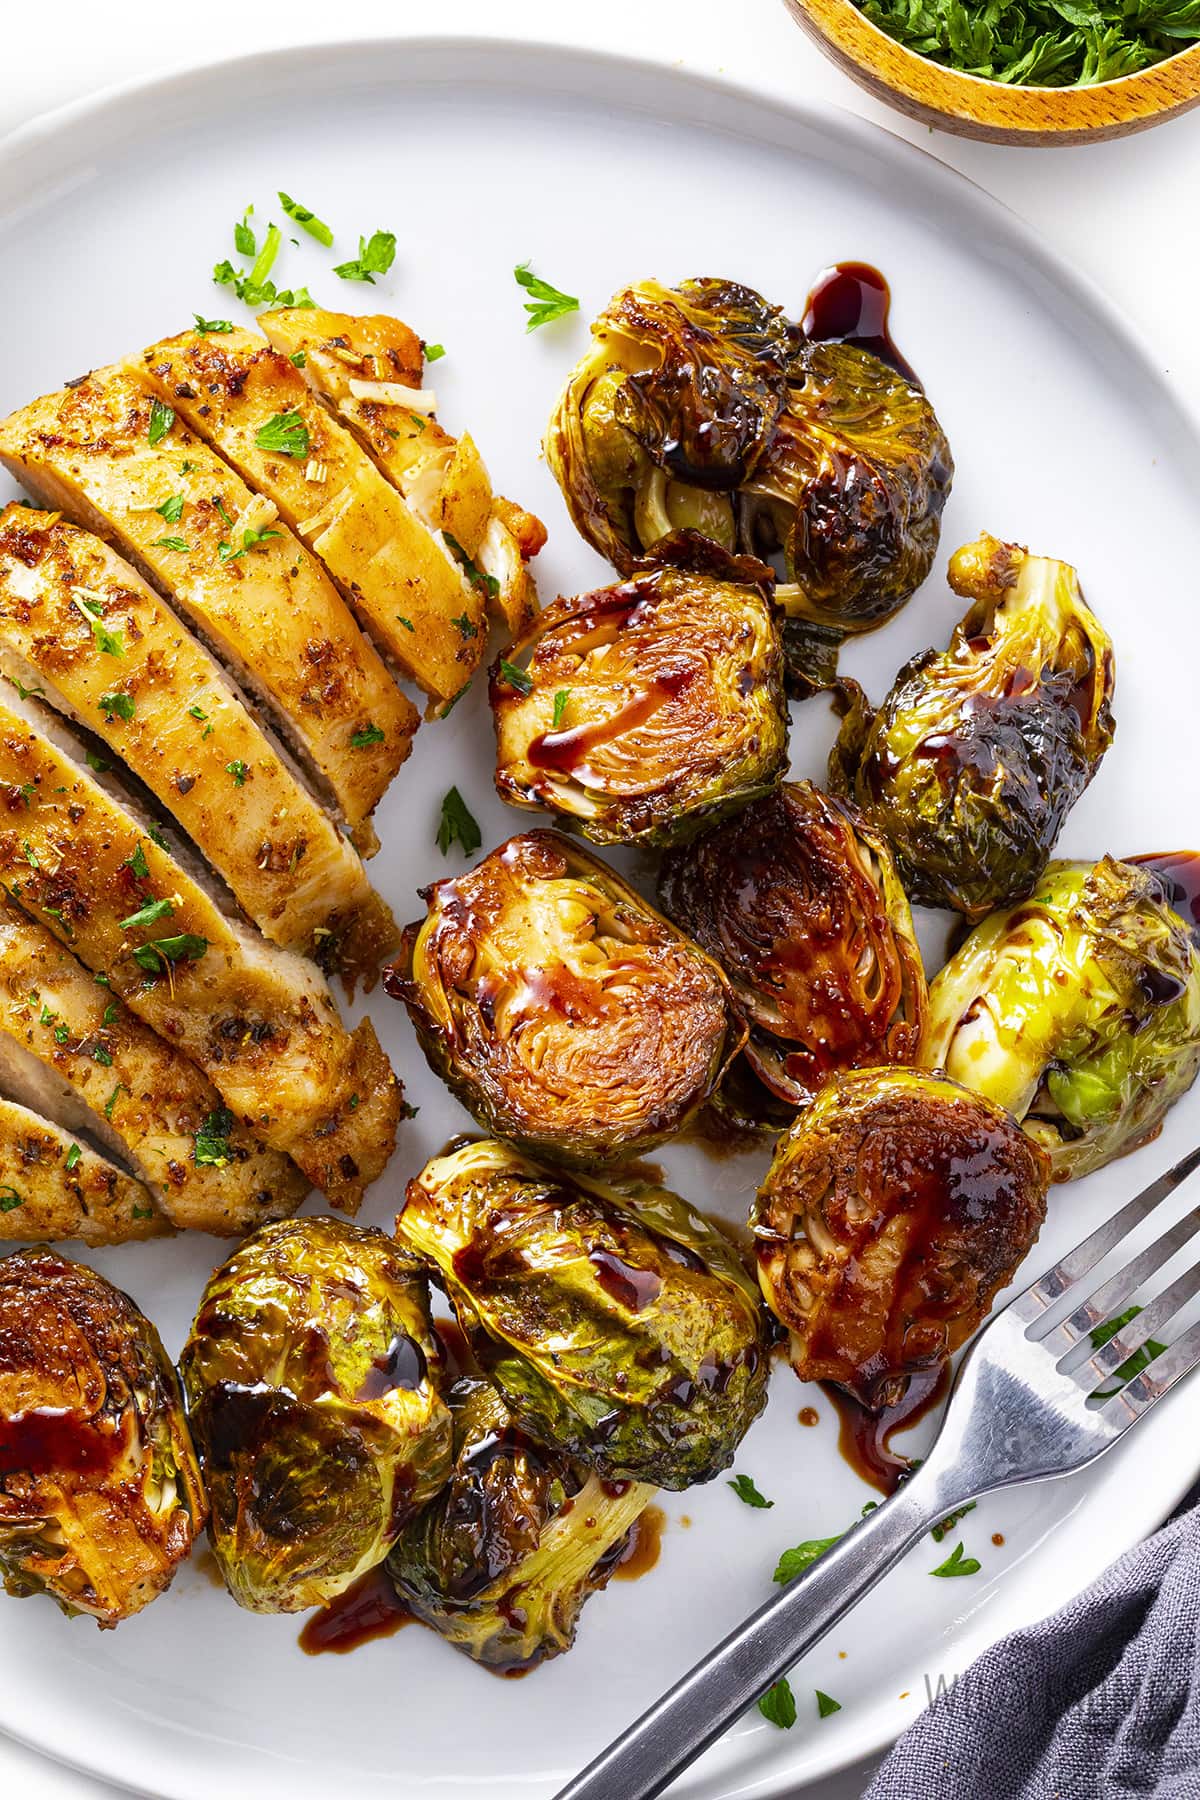 Balsamic glazed brussels sprouts on a plate with sliced chicken.